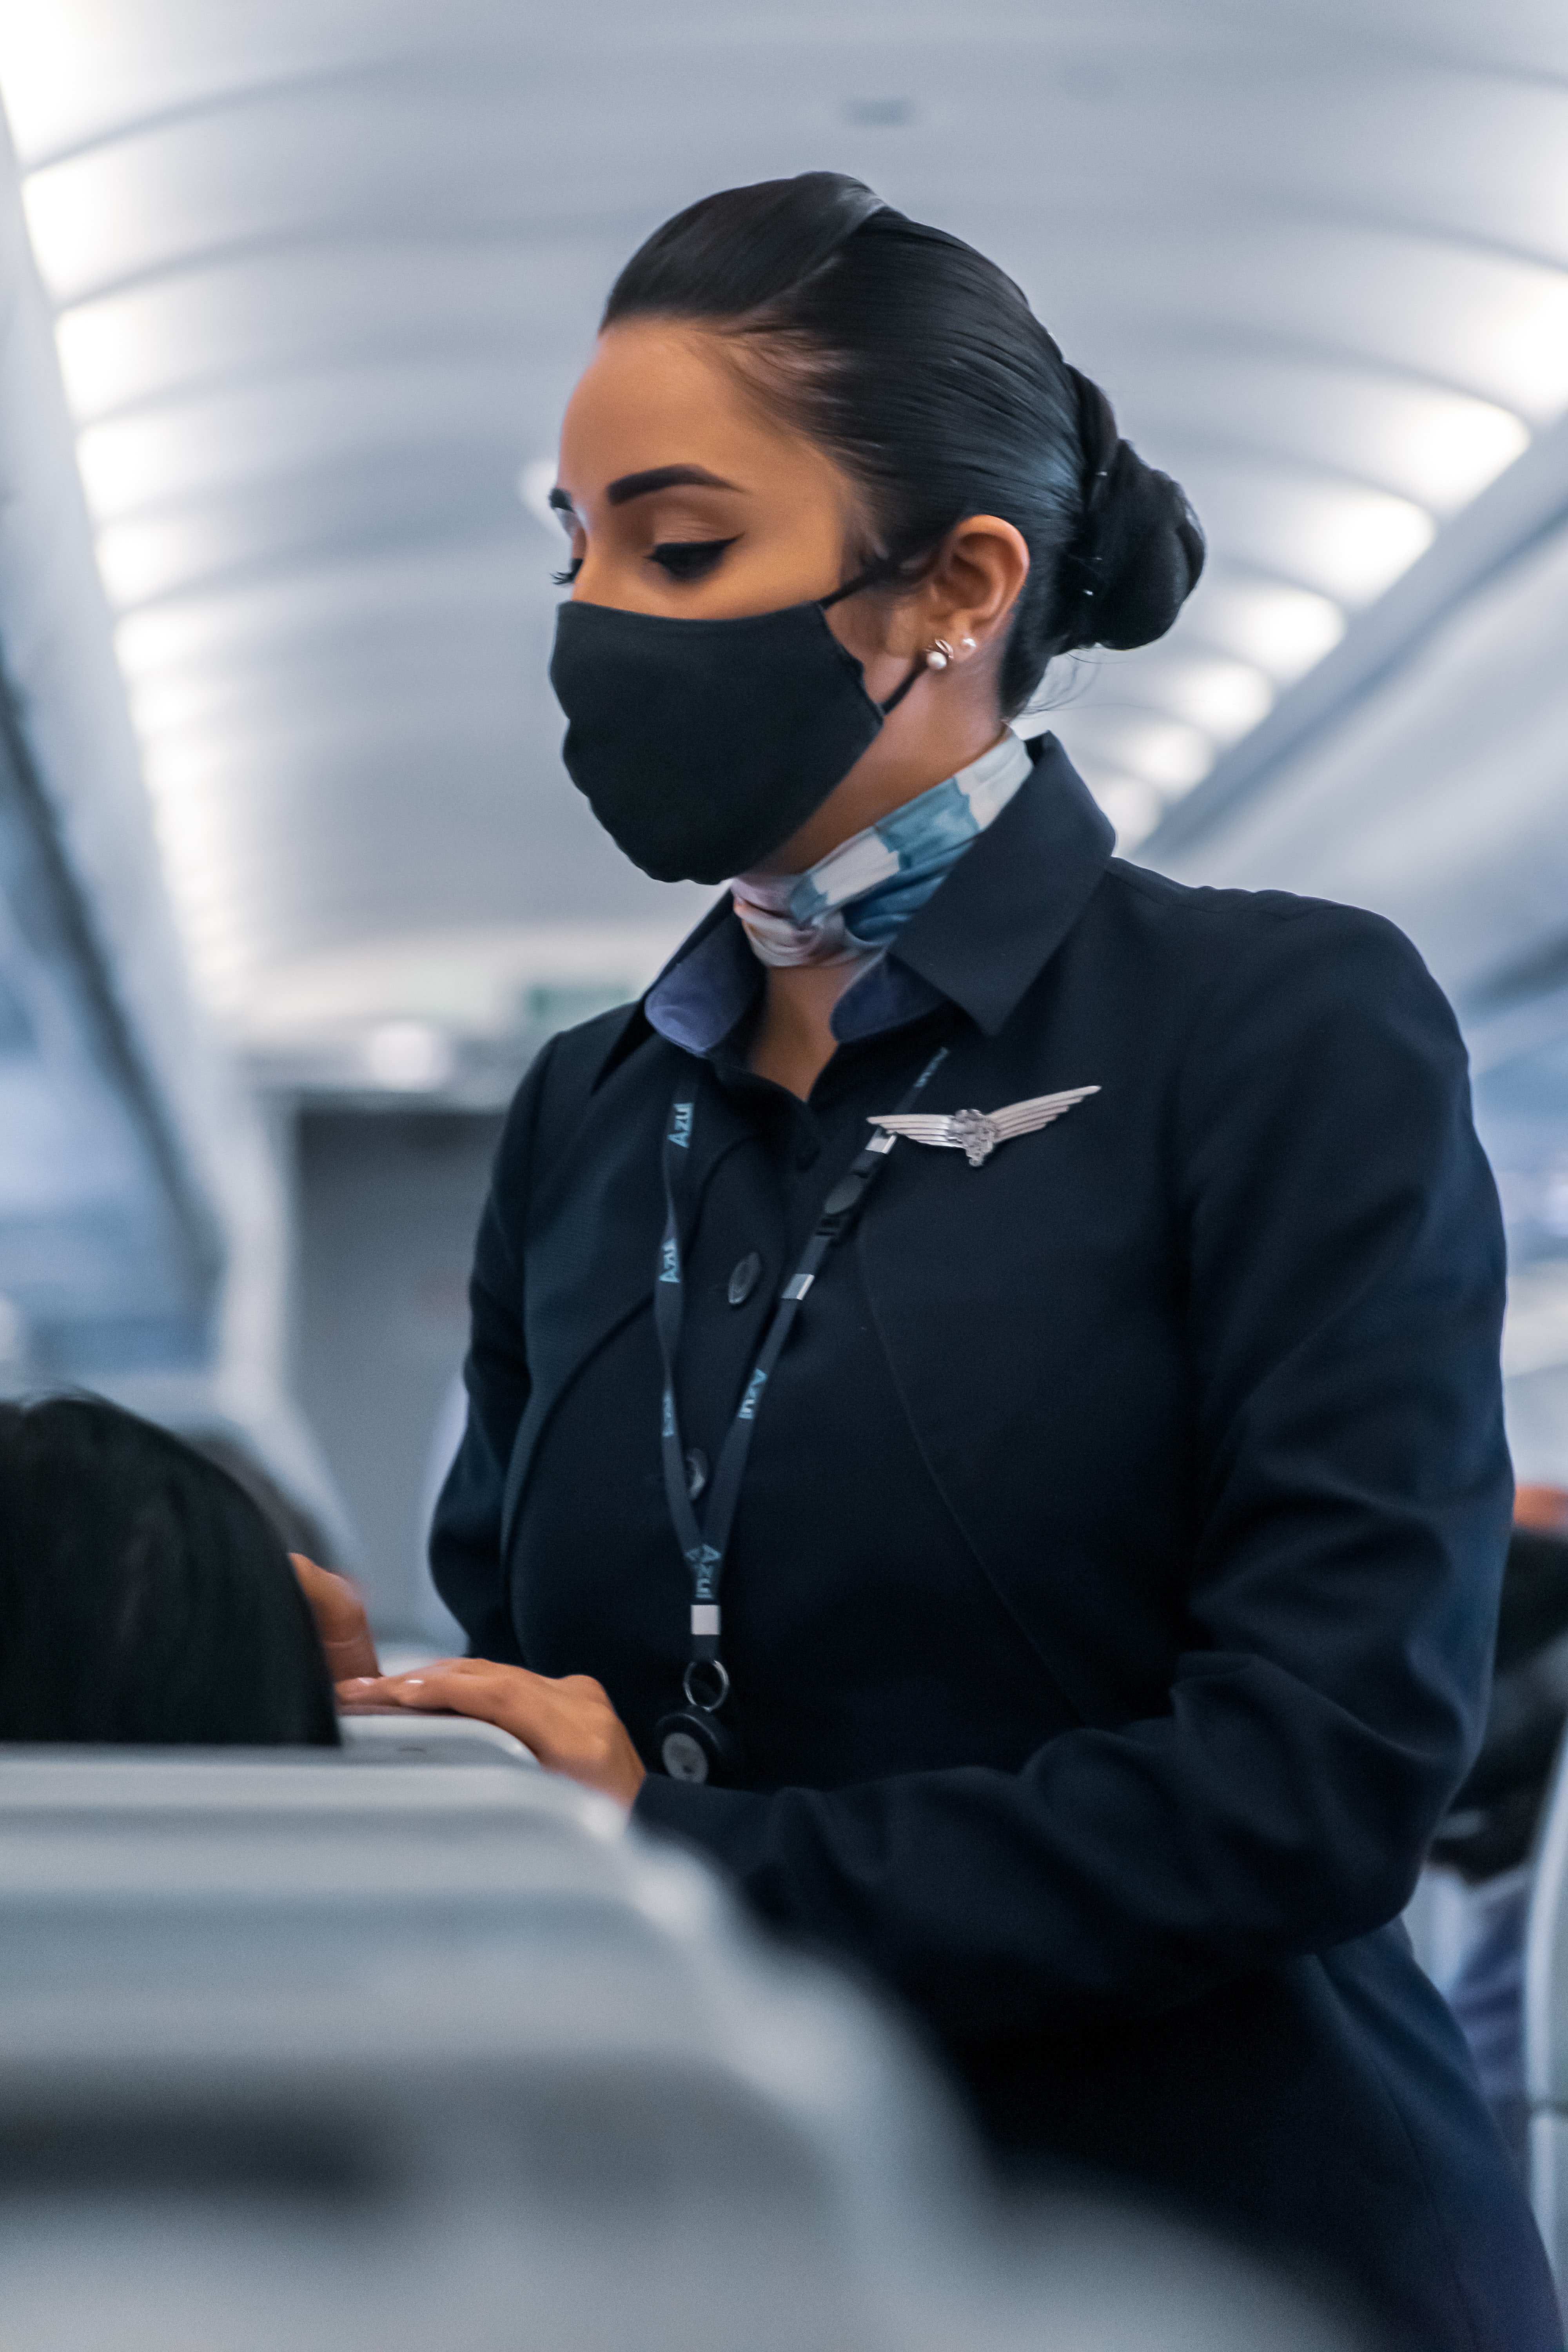 The flight attendant confirmed that Sophia's daughter had boarded the flight | Photo: Unsplash